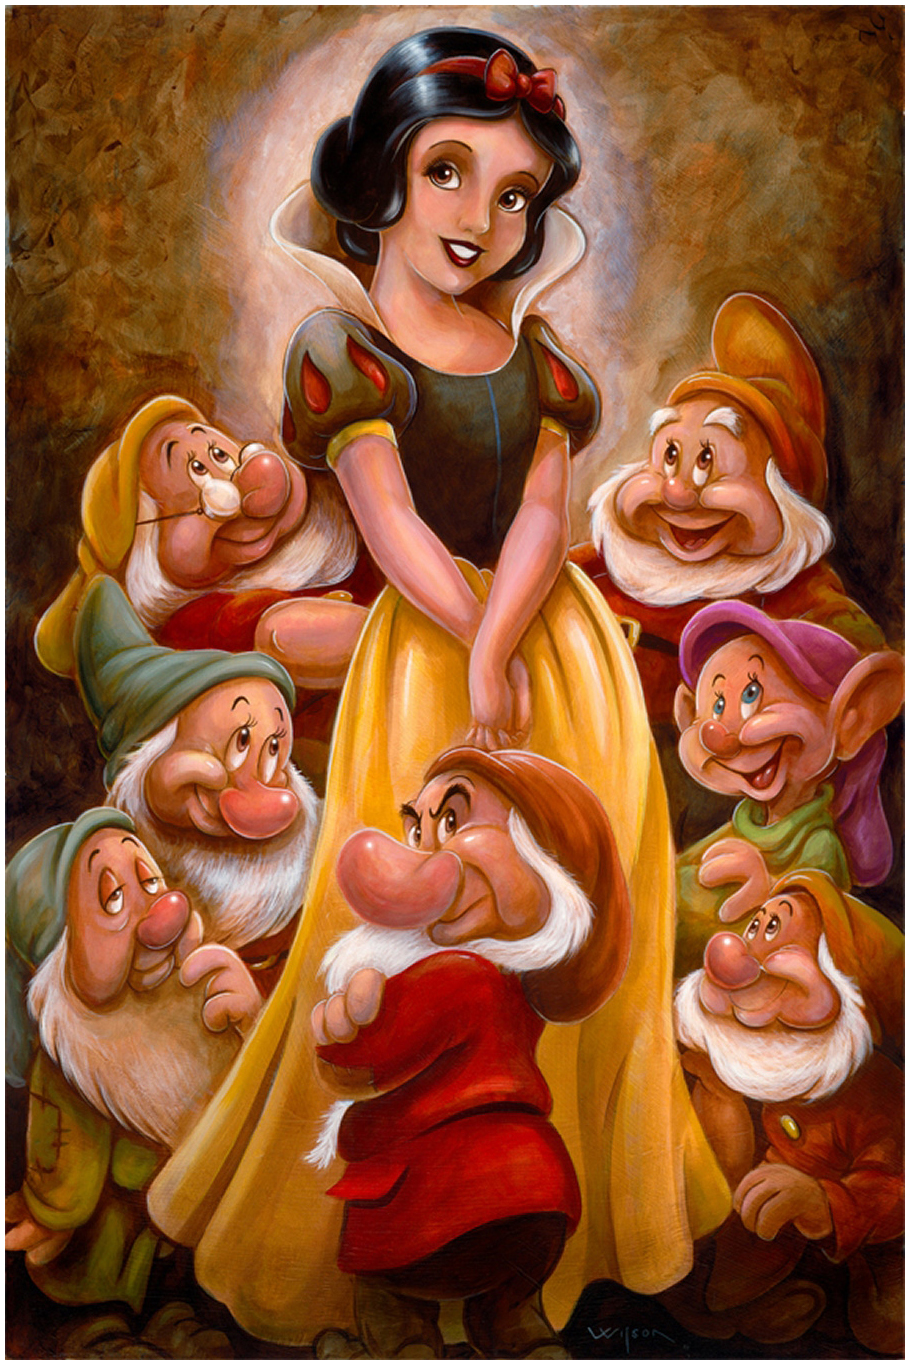 Filmic Light - Snow White Archive: Snow White Paintings of Darren